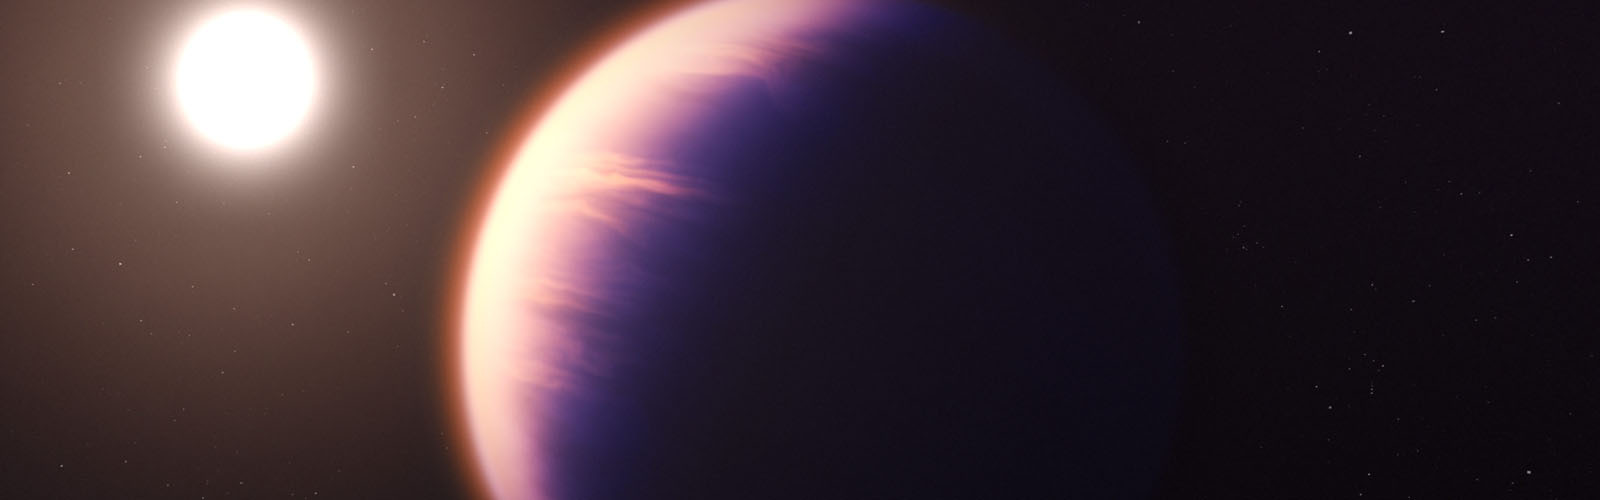 An illustration shows an orangish exoplanet with its star very nearby and to the left. The gas giant planet has a gauzy looking atmosphere.